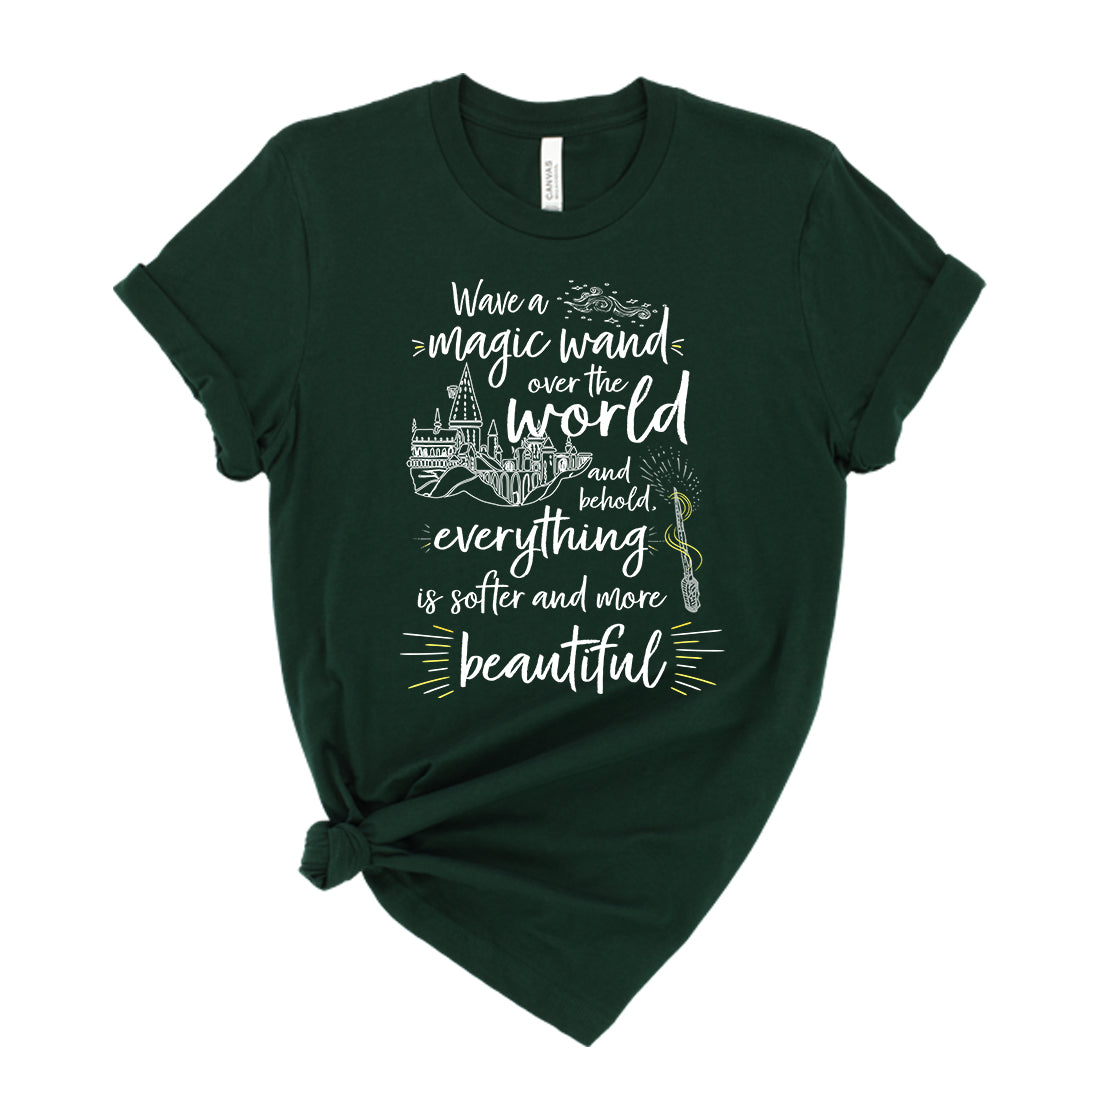 Wave a wand over the world and behold, everything is softer and more beautiful HP Wizard Shirt